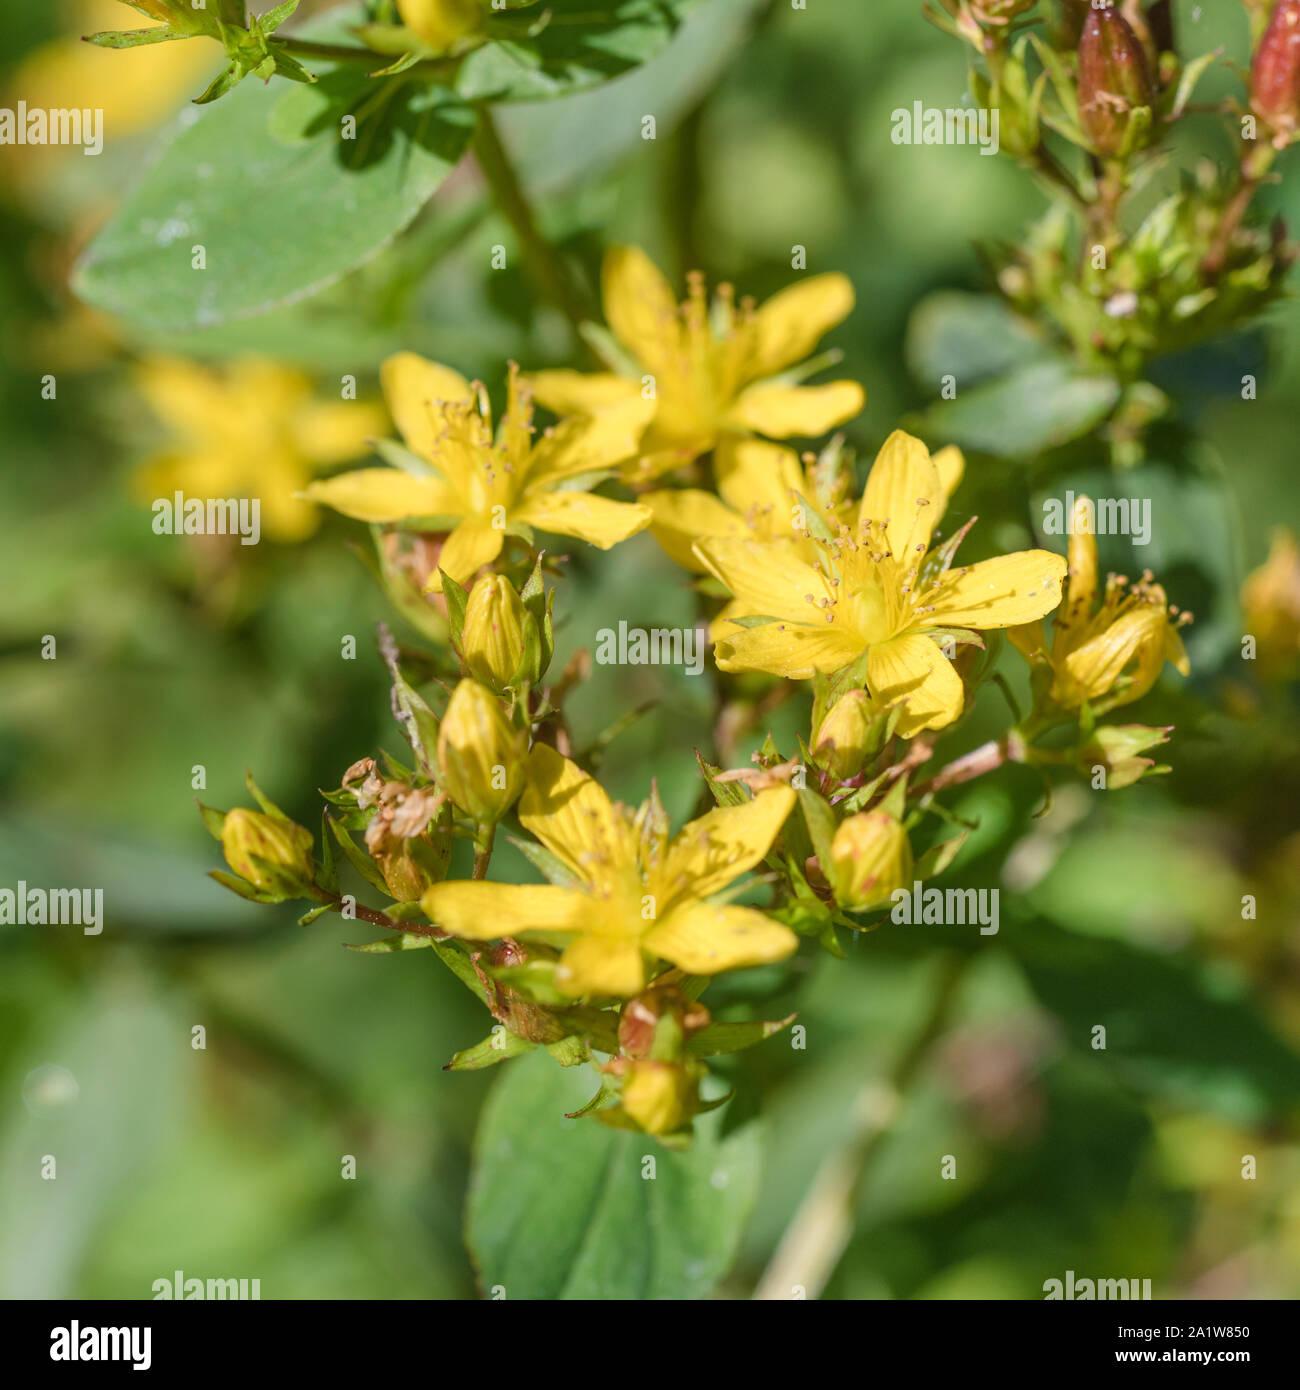 Bright yellow flowers of Square-Stalked St. John's Wort / Hypericum tetrapterum = H. quadratum (Sept.) growing in damp ground. Read additional notes. Stock Photo